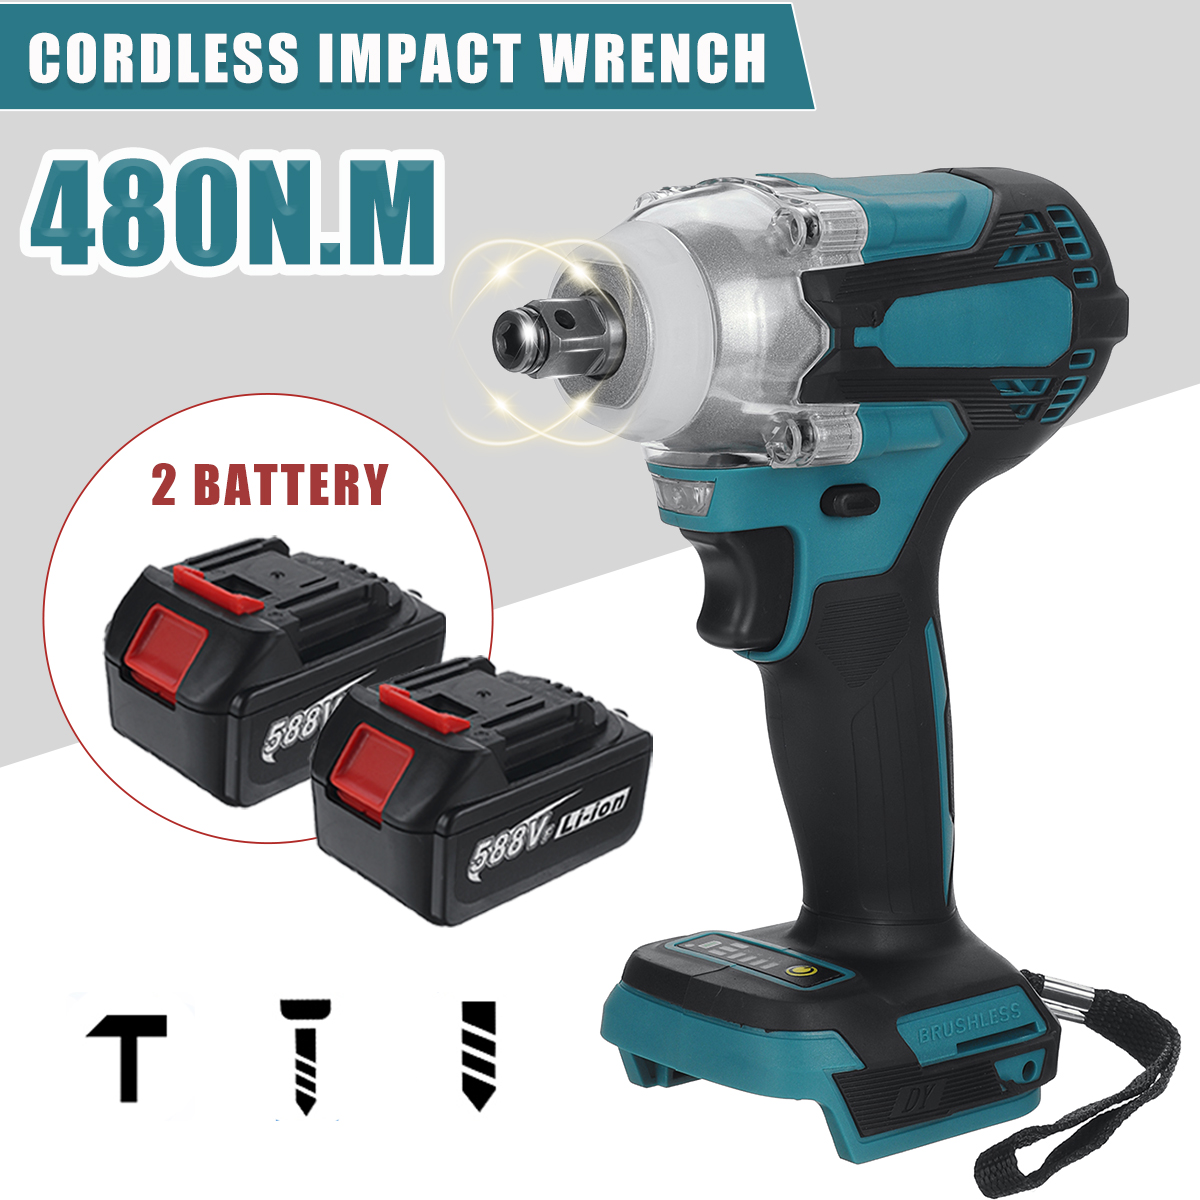 588VF-480Nm-Brushless-Cordless-Electric-Wrench-Li-Ion-Battery-Wrench-Power-Tool-W-12-Battery--Storag-1861486-2